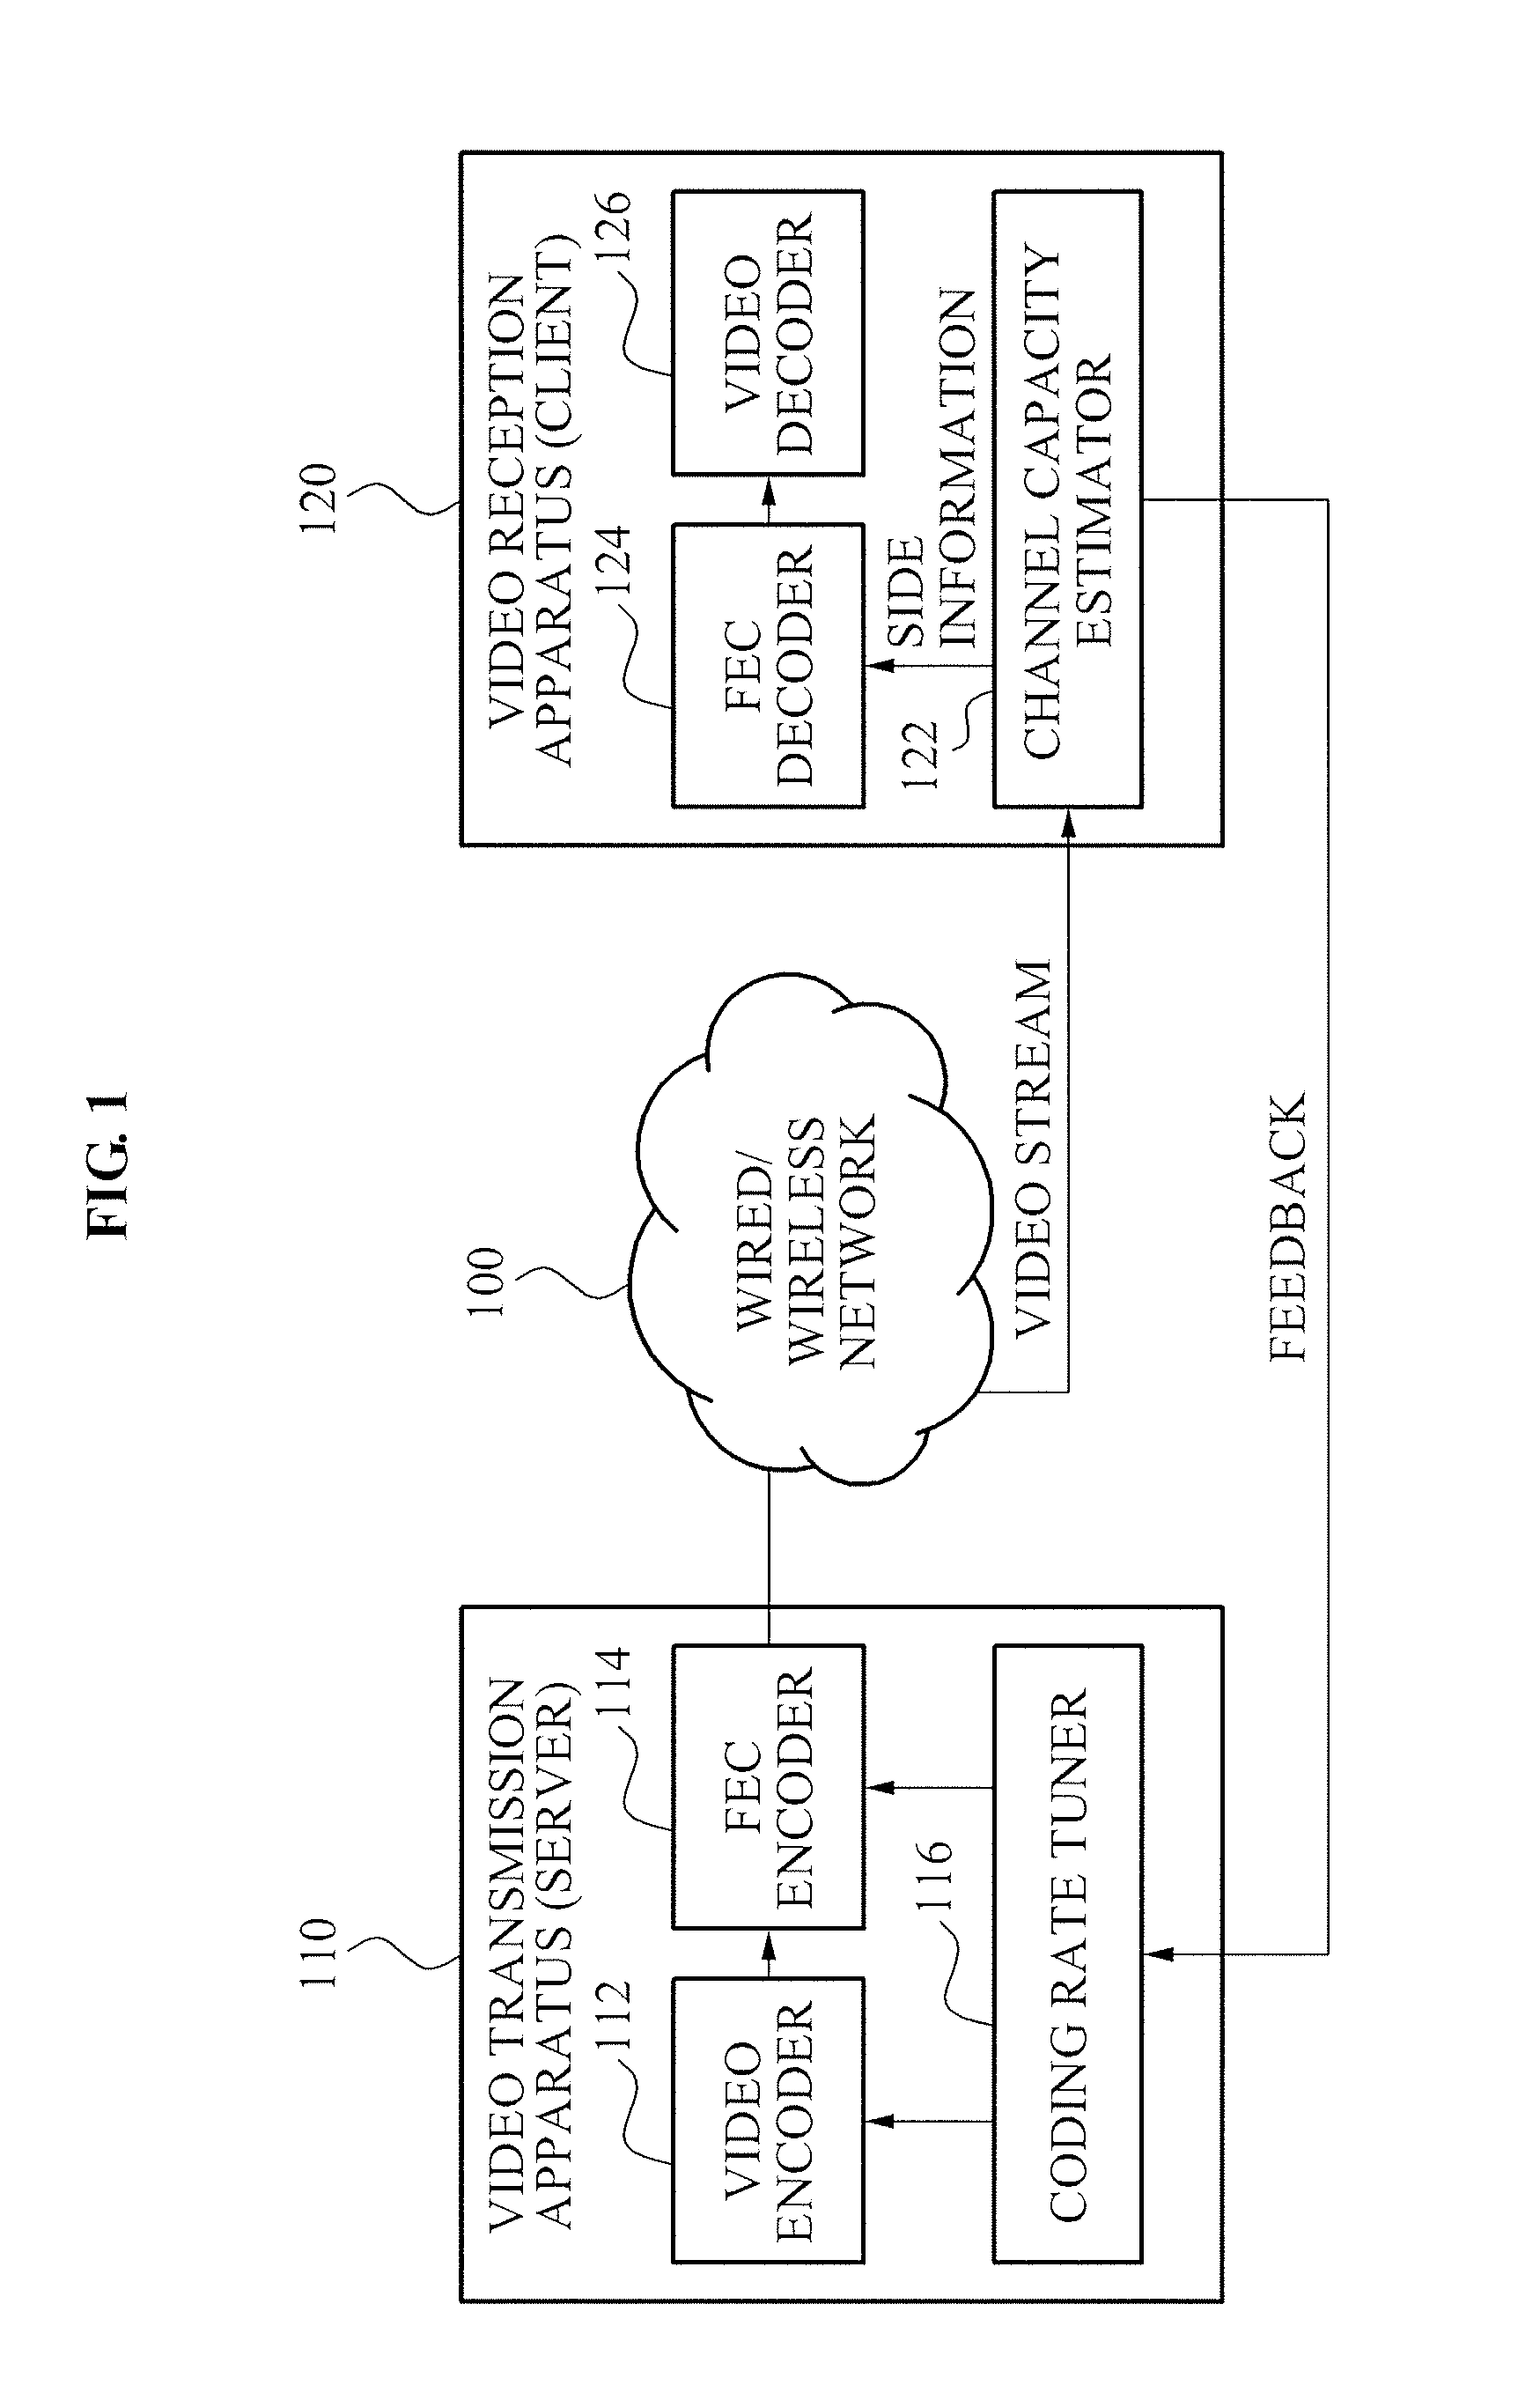 Method for tuning coding rate and applying unequal error protection for adaptive video transmission, and video transmission/reception apparatus using the method